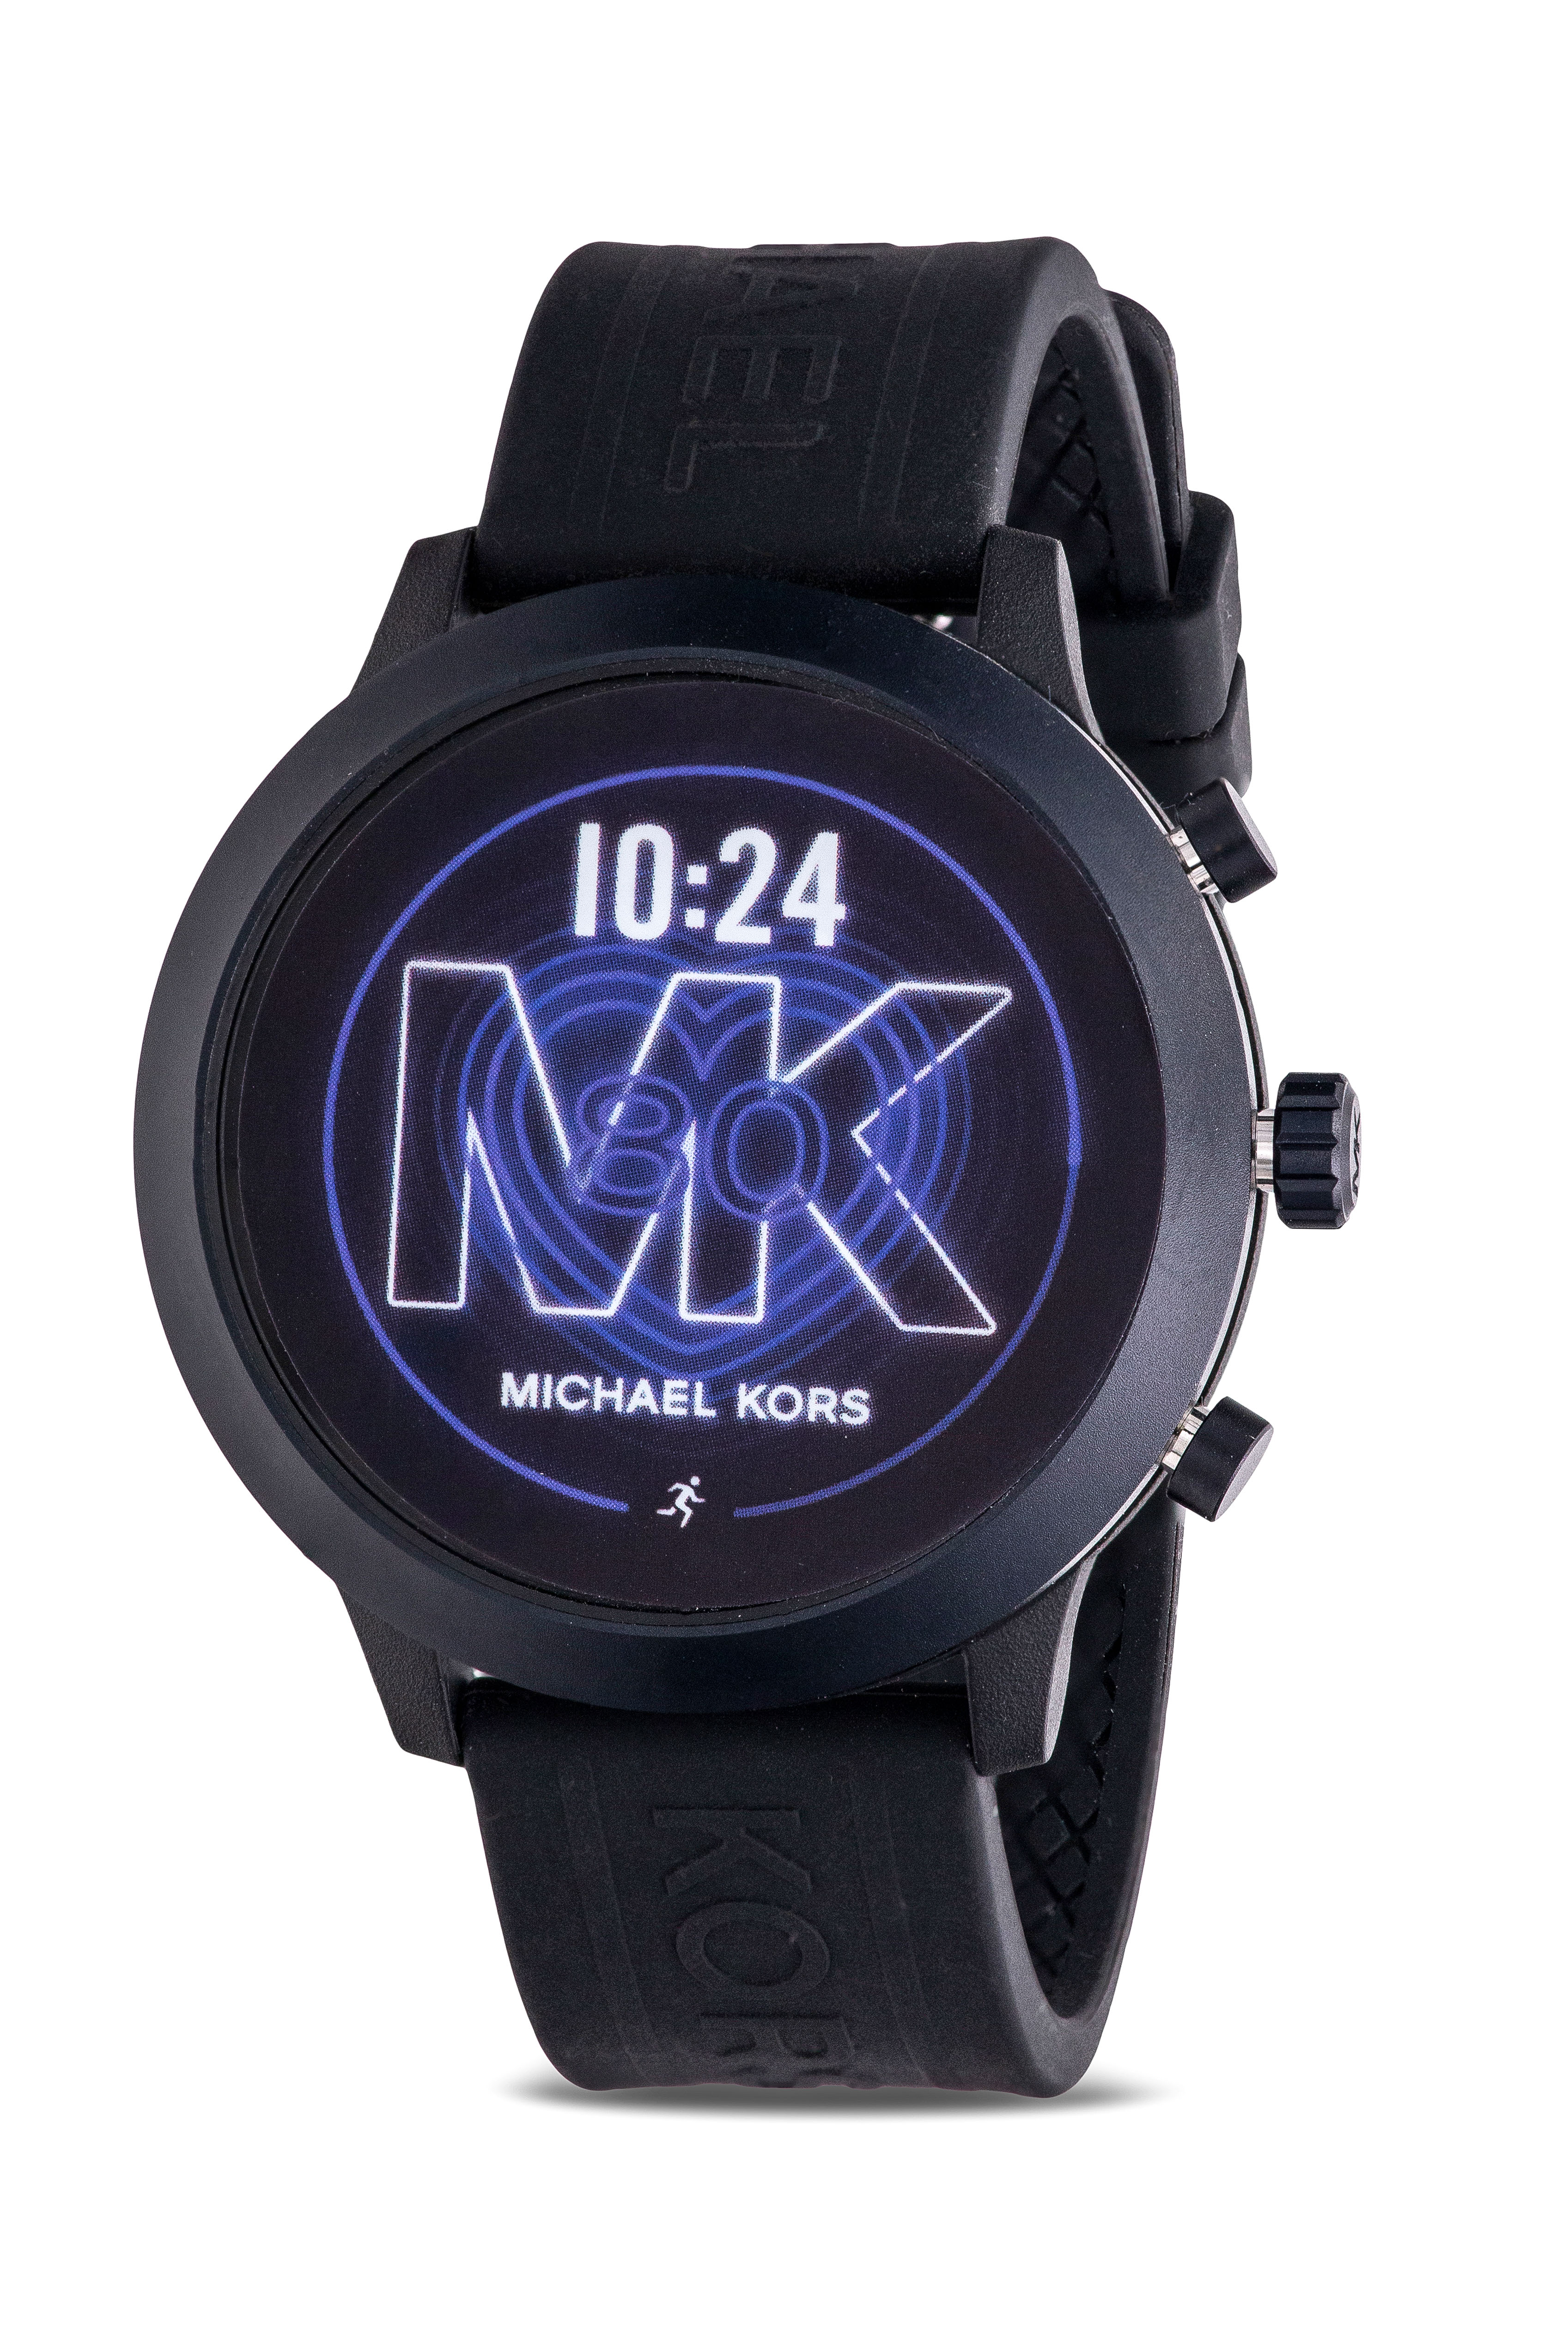 michael kors sofie smartwatch compatible with iphone